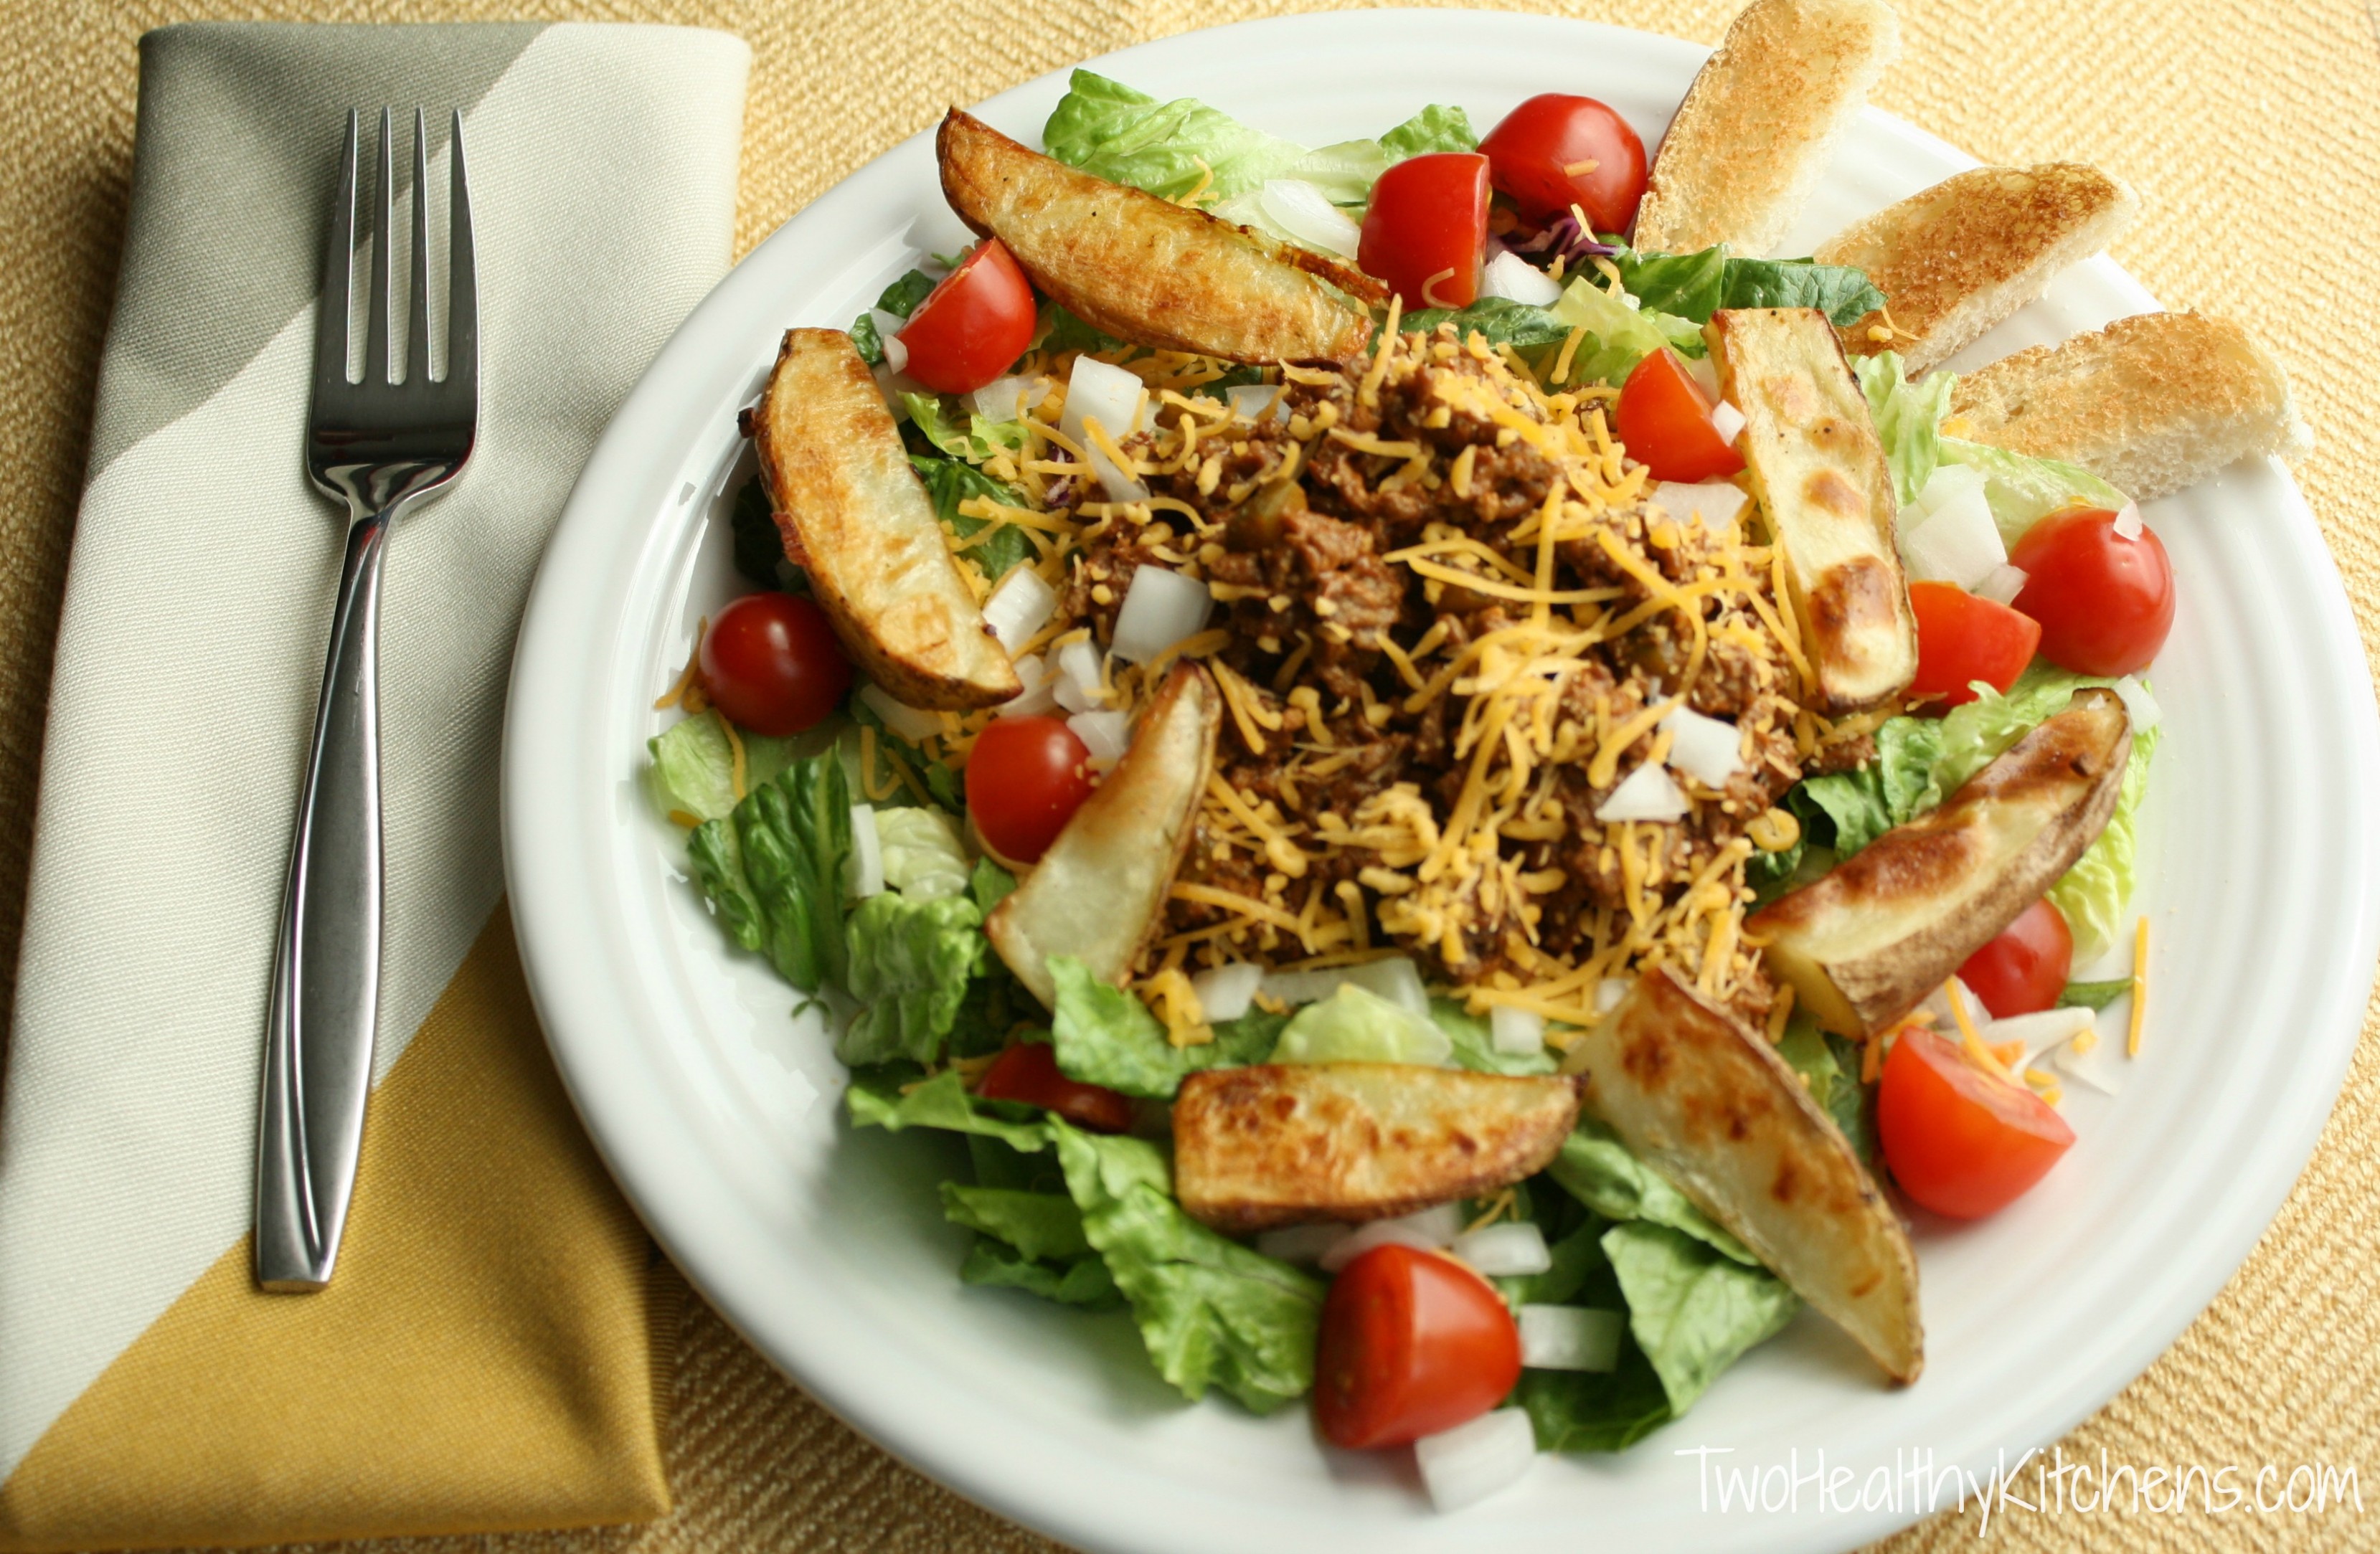 Cheeseburger Salad with Oven-Roasted Fries Recipe {www.TwoHealthyKitchens.com}